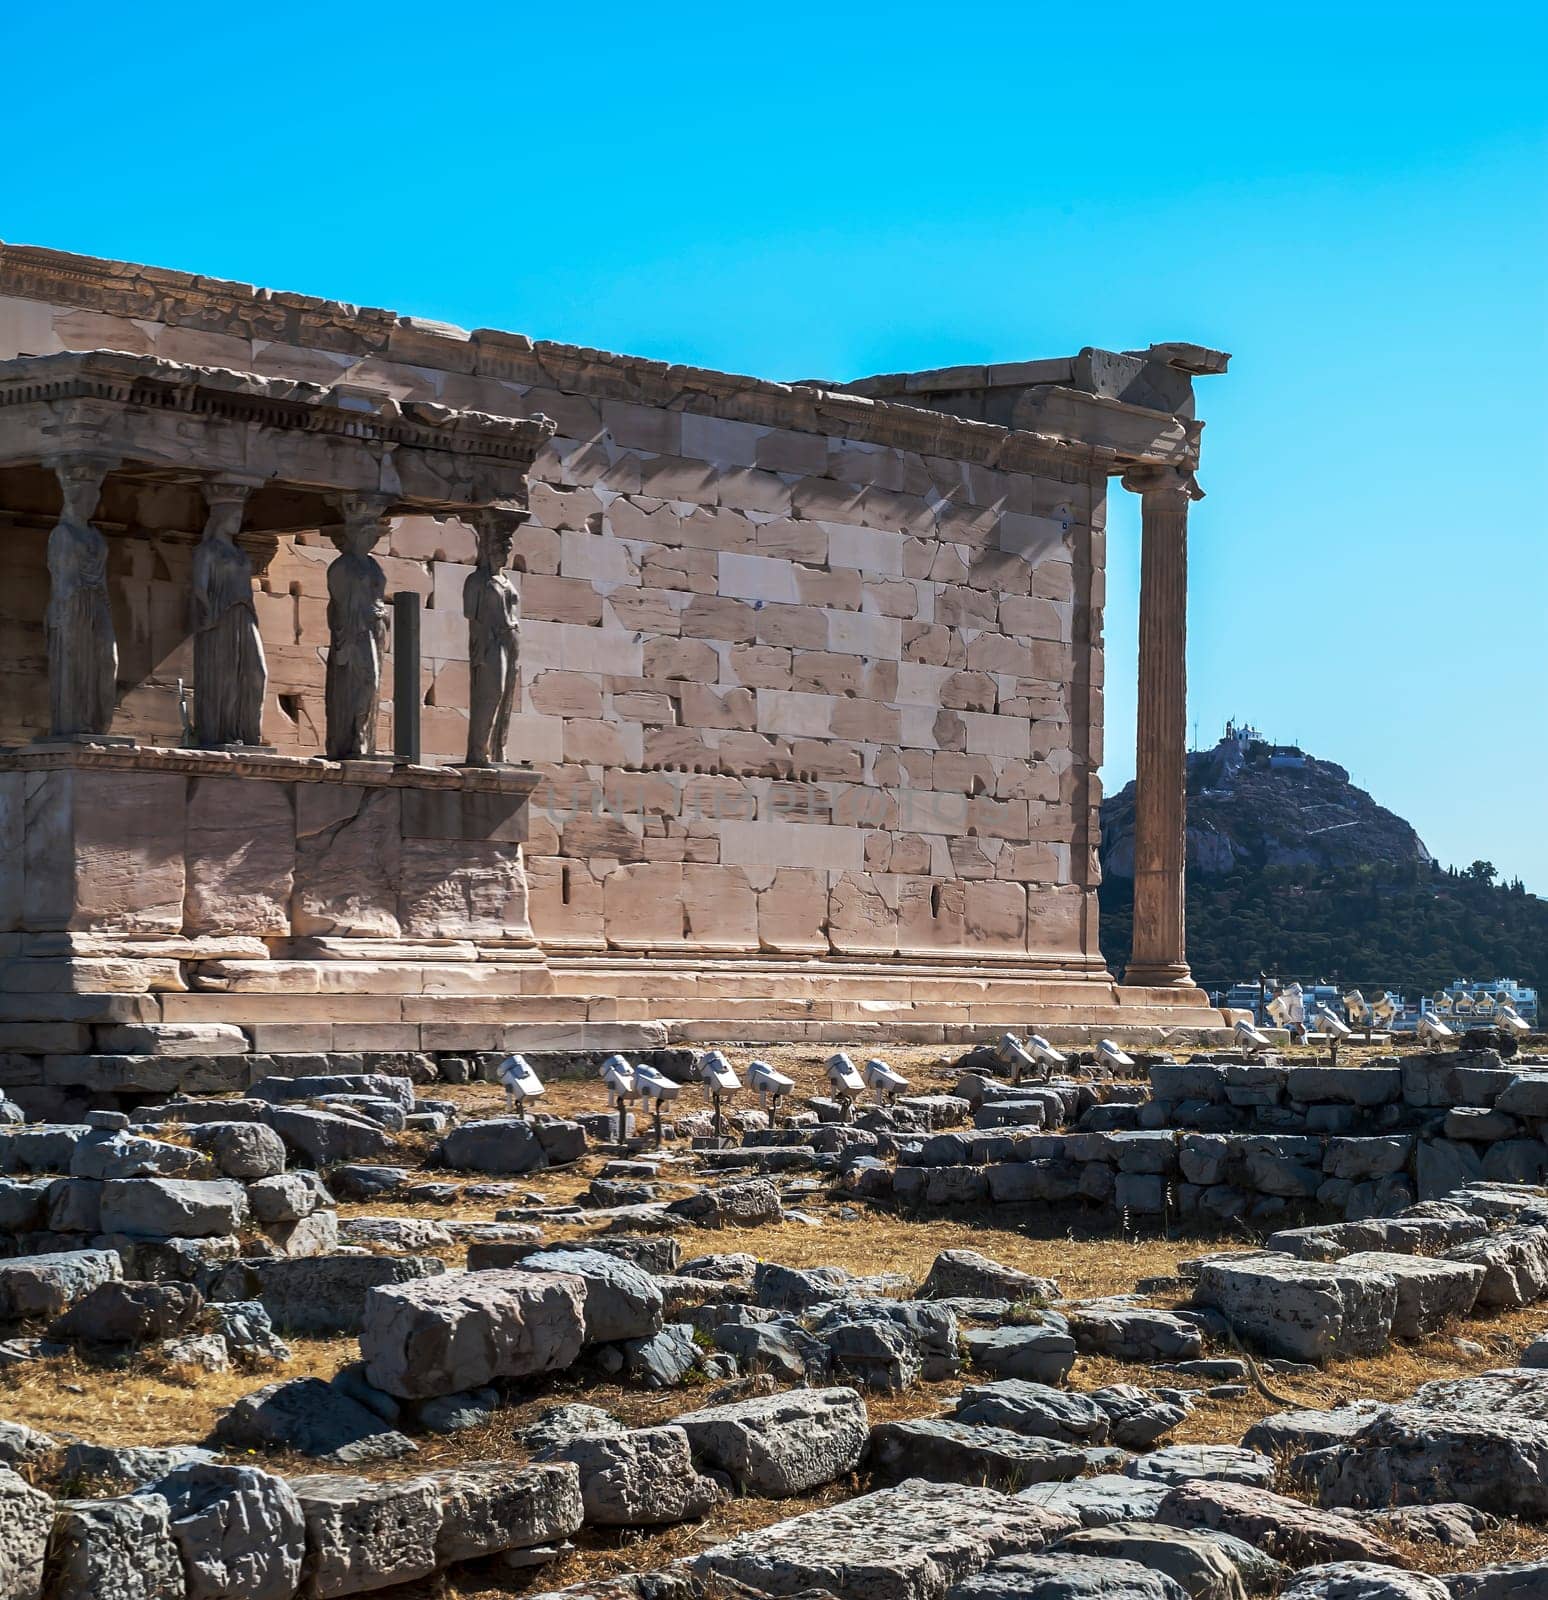 Acropolis - Erechtheum Temple in Athens by Giamplume